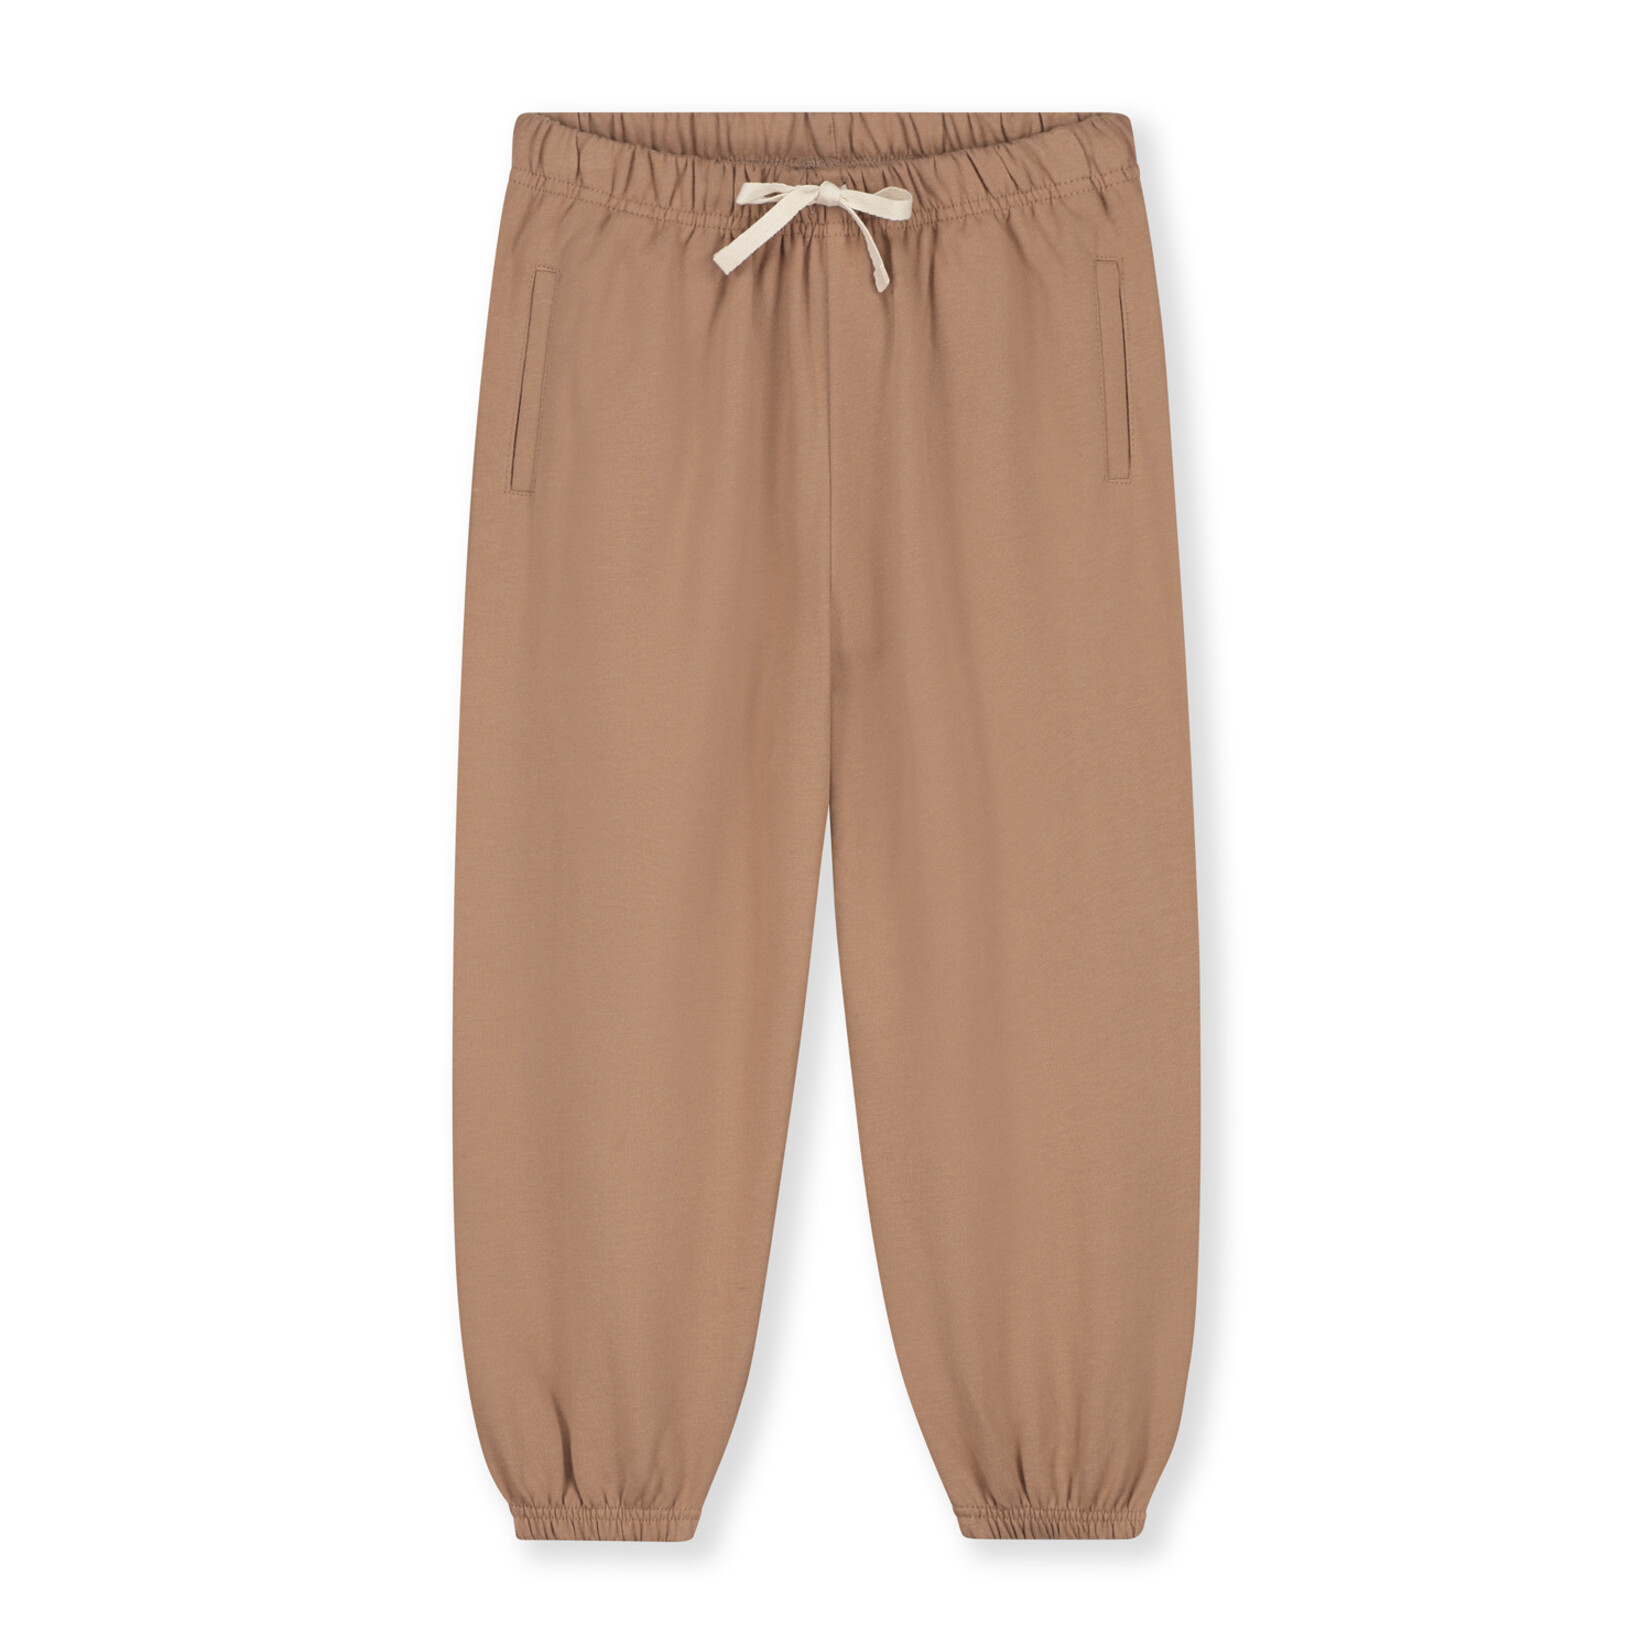 Gray Label Track Pants GOTS - Biscuit